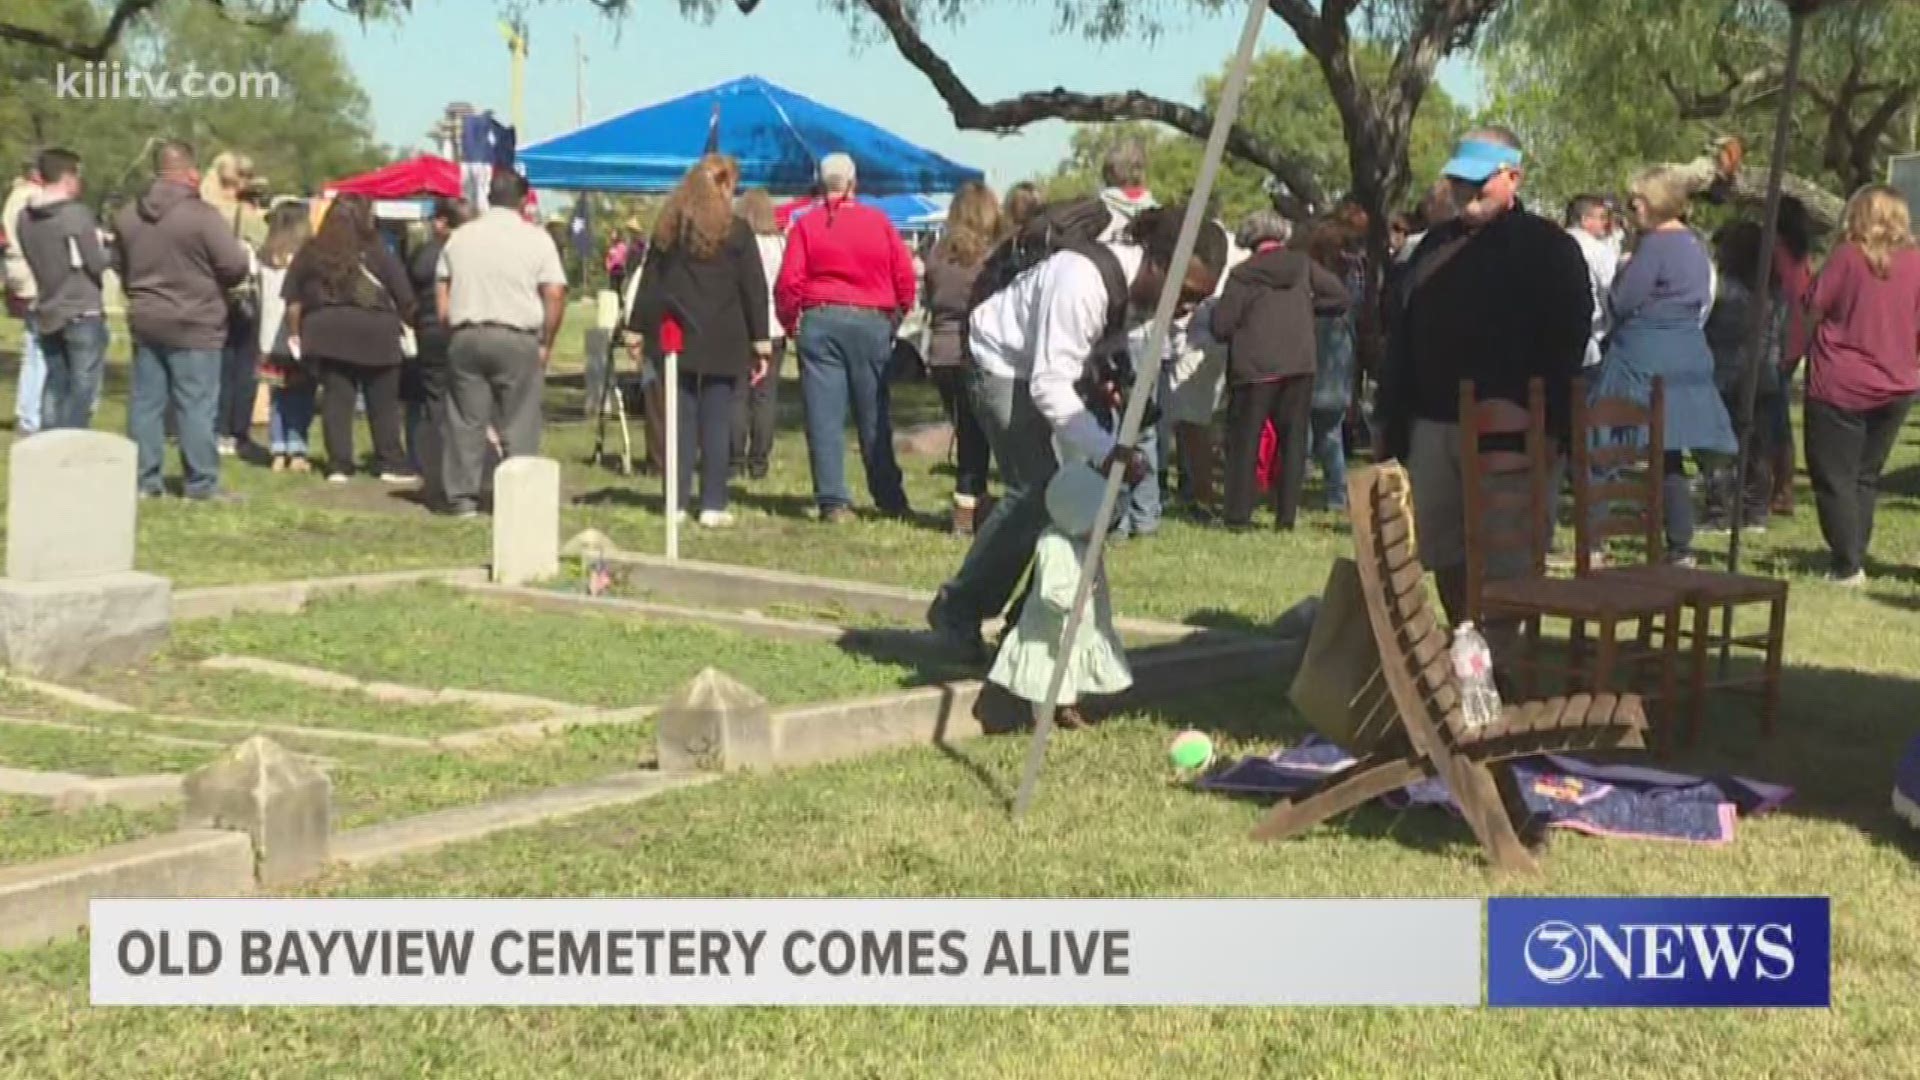 The event was held in the Old Bayview Cemetery